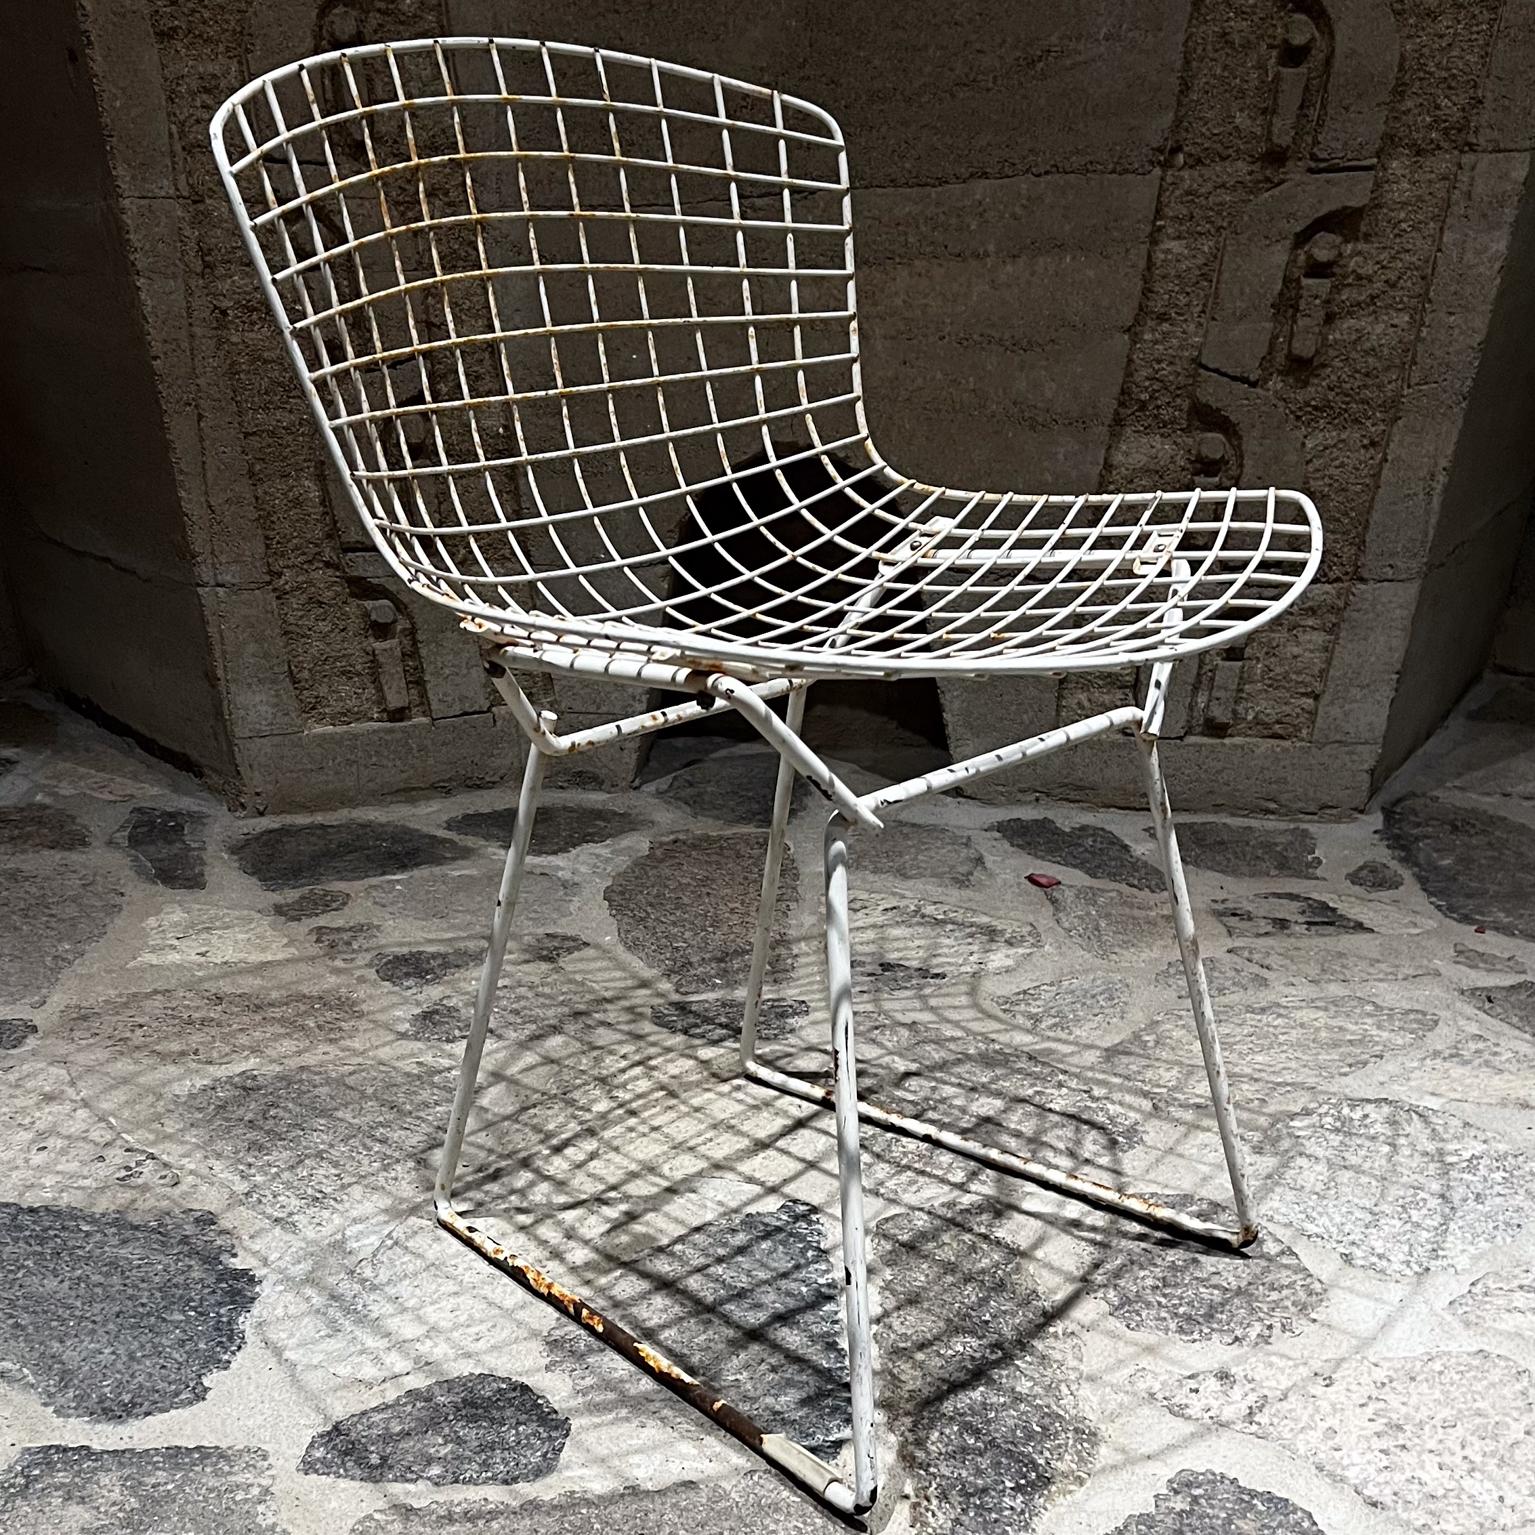 1952 Harry Bertoia Knoll side chair white wire
unmarked
30 h x 21.25 w x 21.25 d x Seat 18 h
Original unrestored preowned vintage distressed condition.
Please refer to all images.

